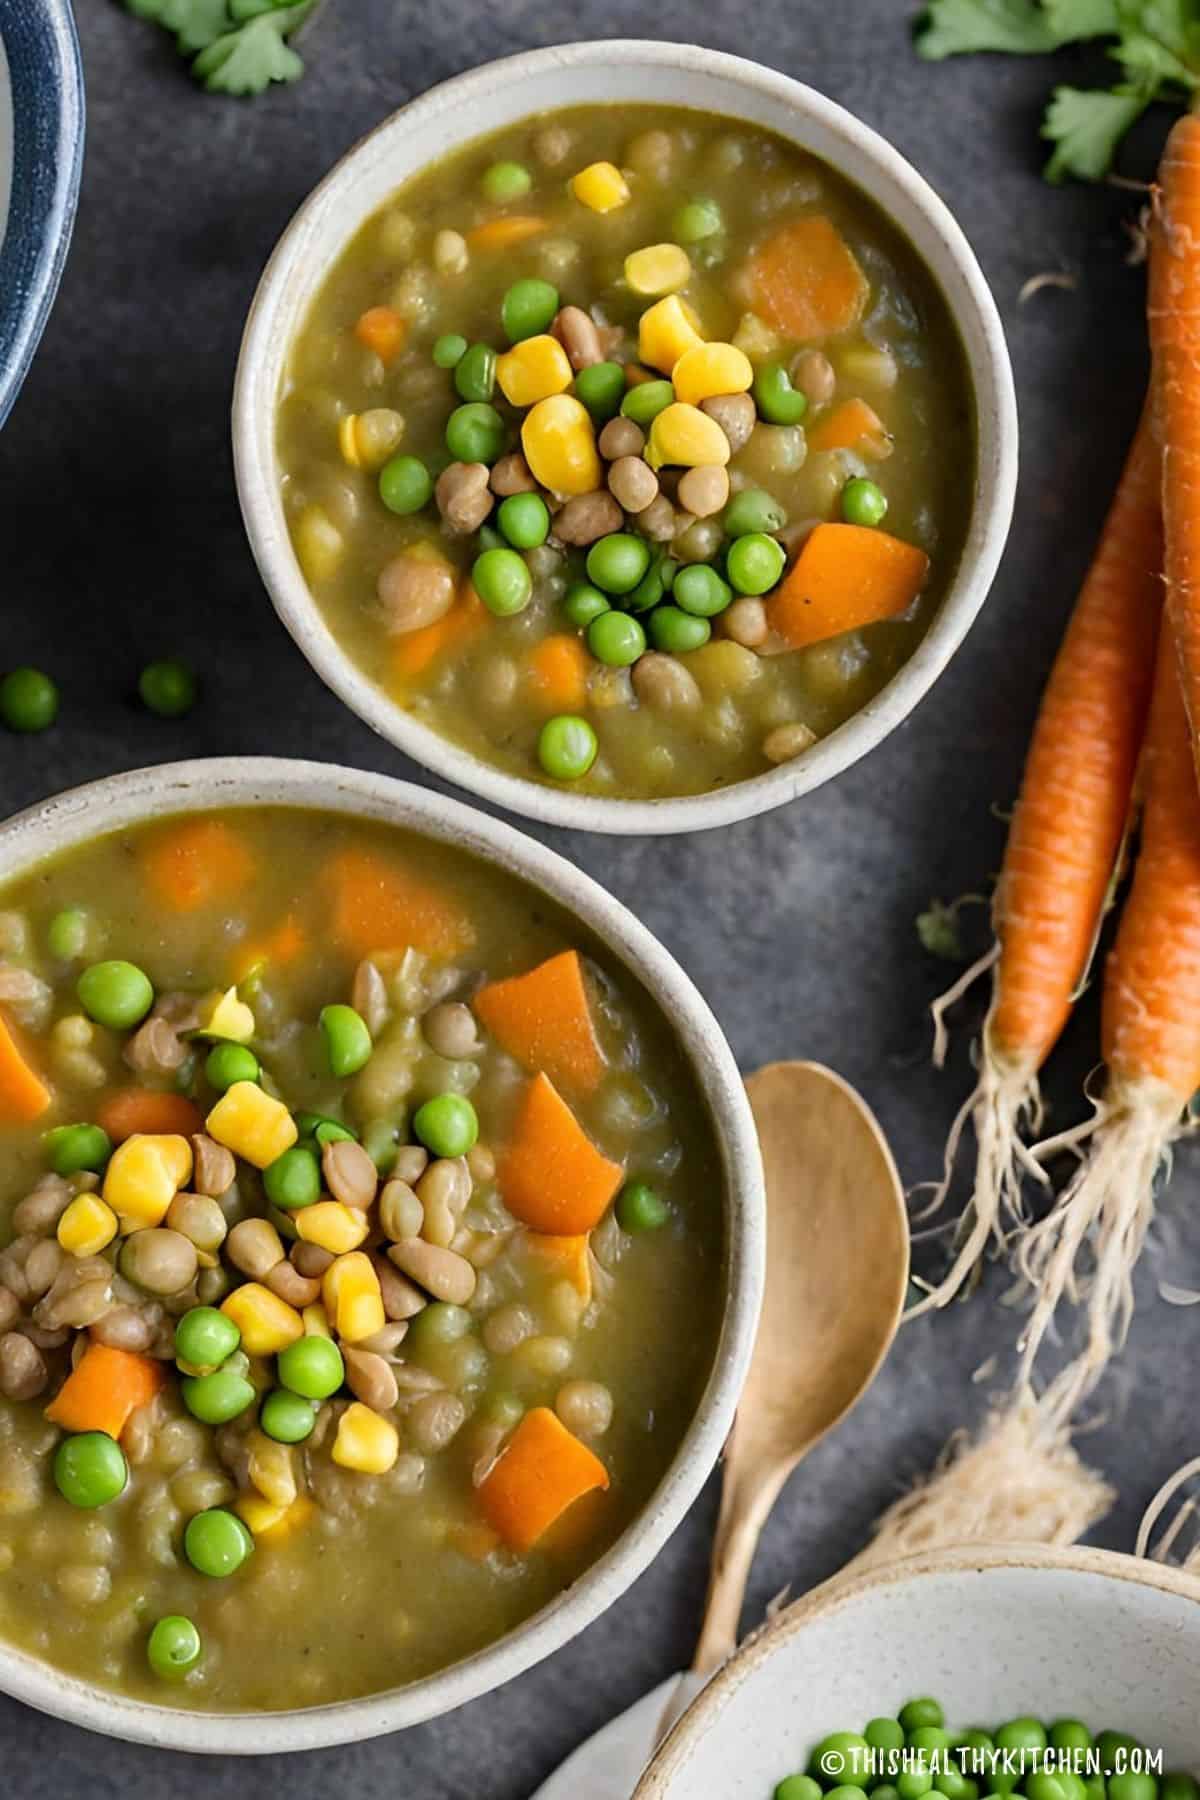 Bowls of lentil and veggie soup with carrots on the side.